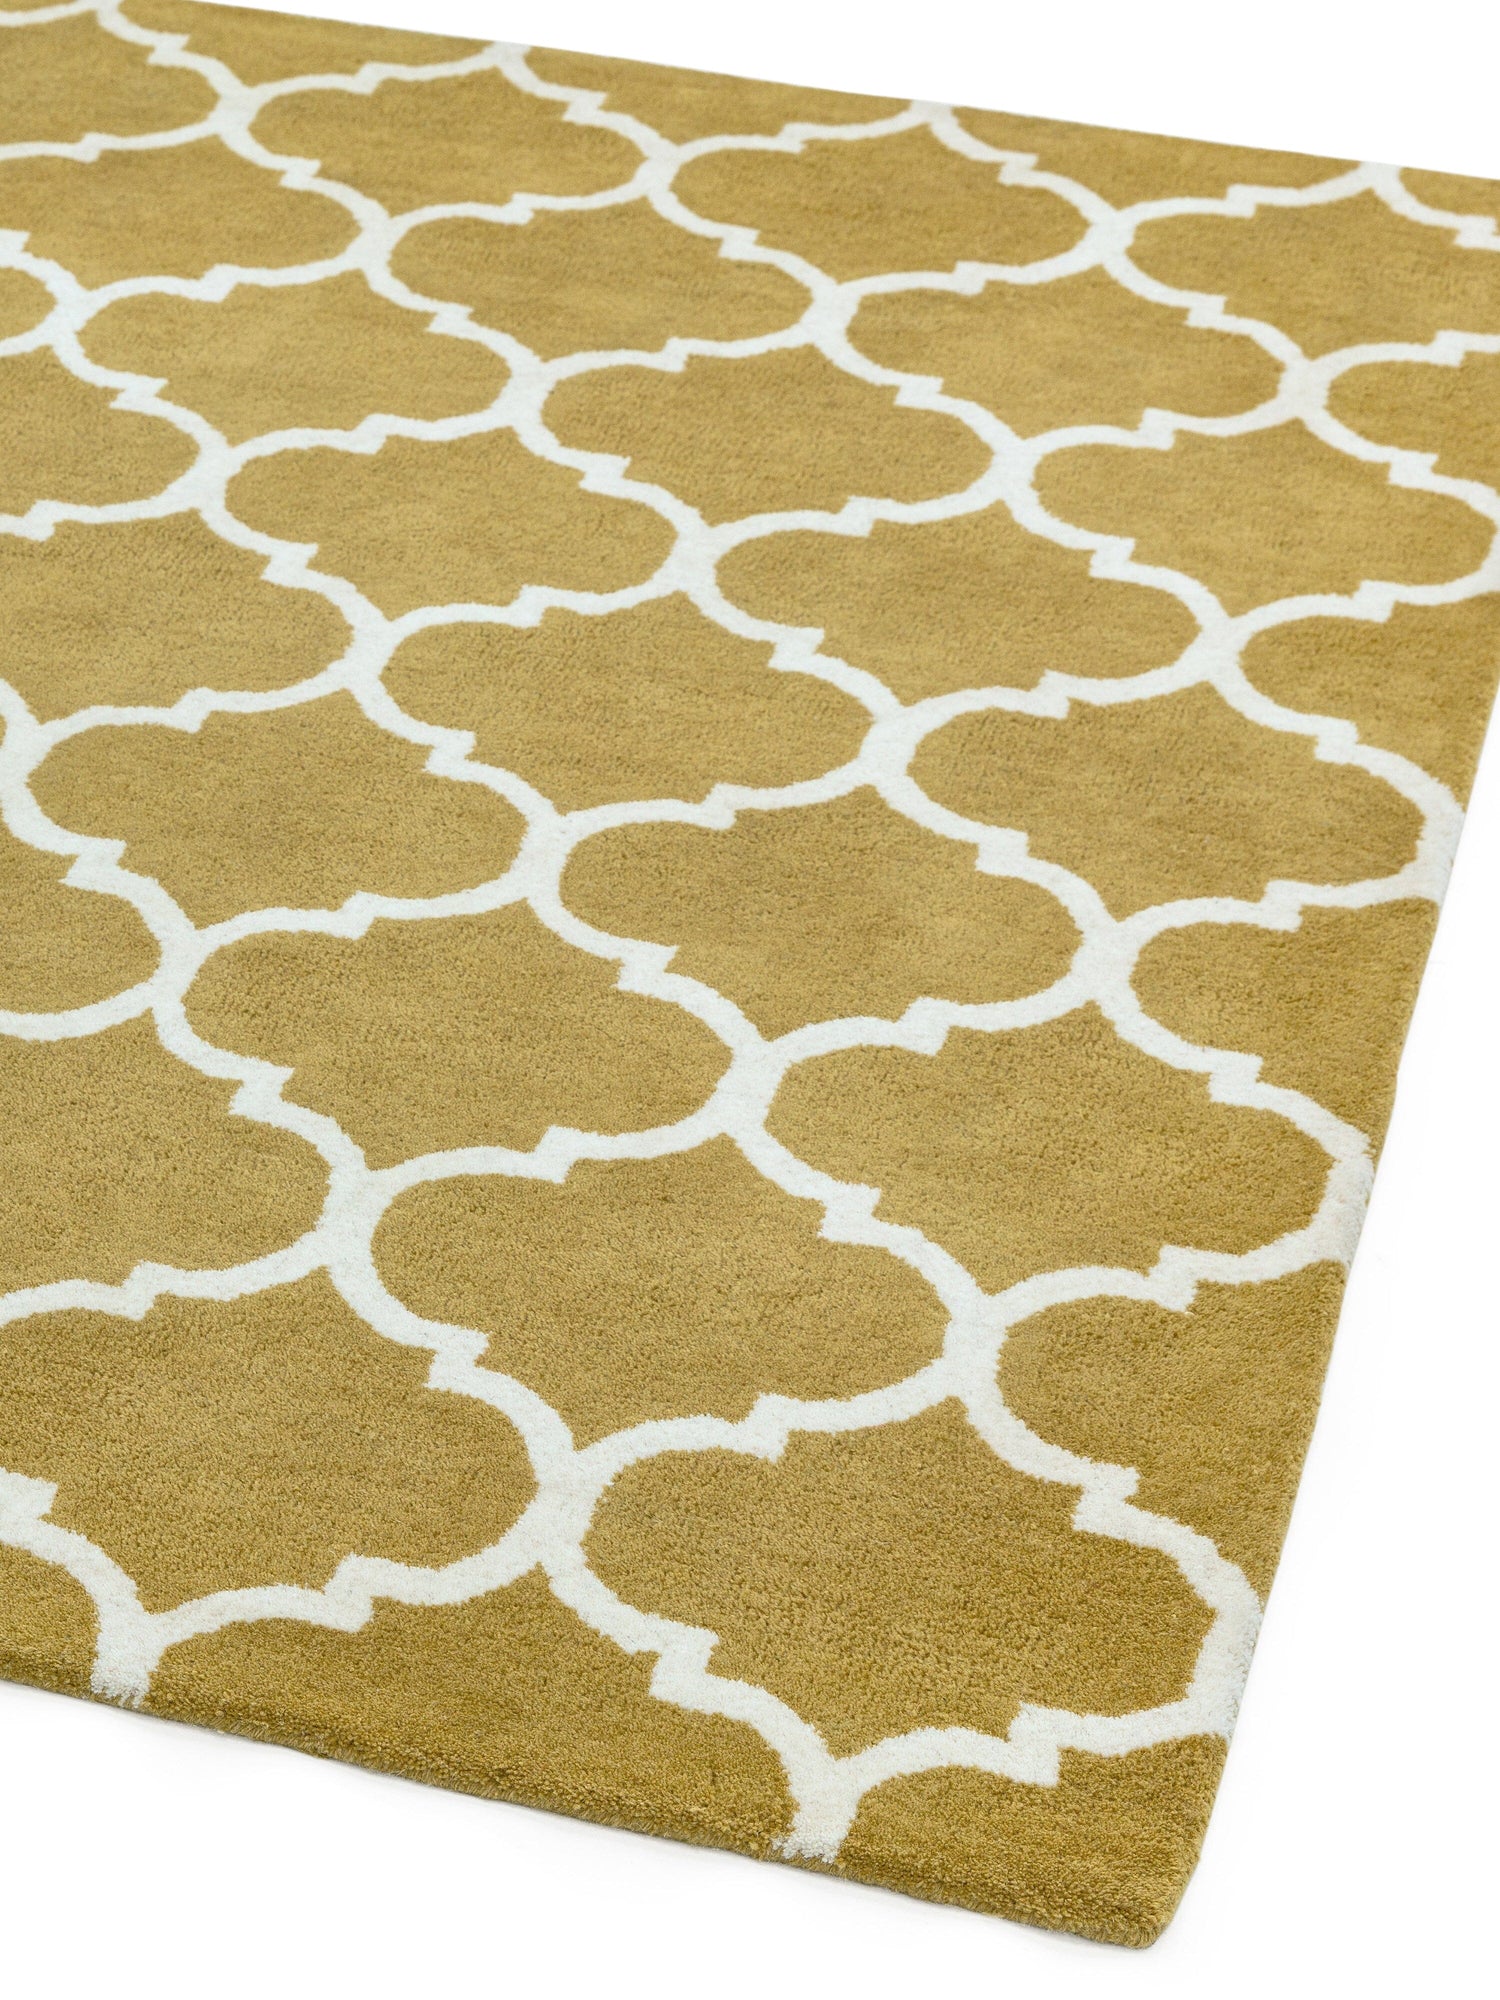  Asiatic Carpets-Asiatic Carpets Albany Handtufted Rug Ogee Ochre - 80 x 150cm-Yellow, Gold 701 